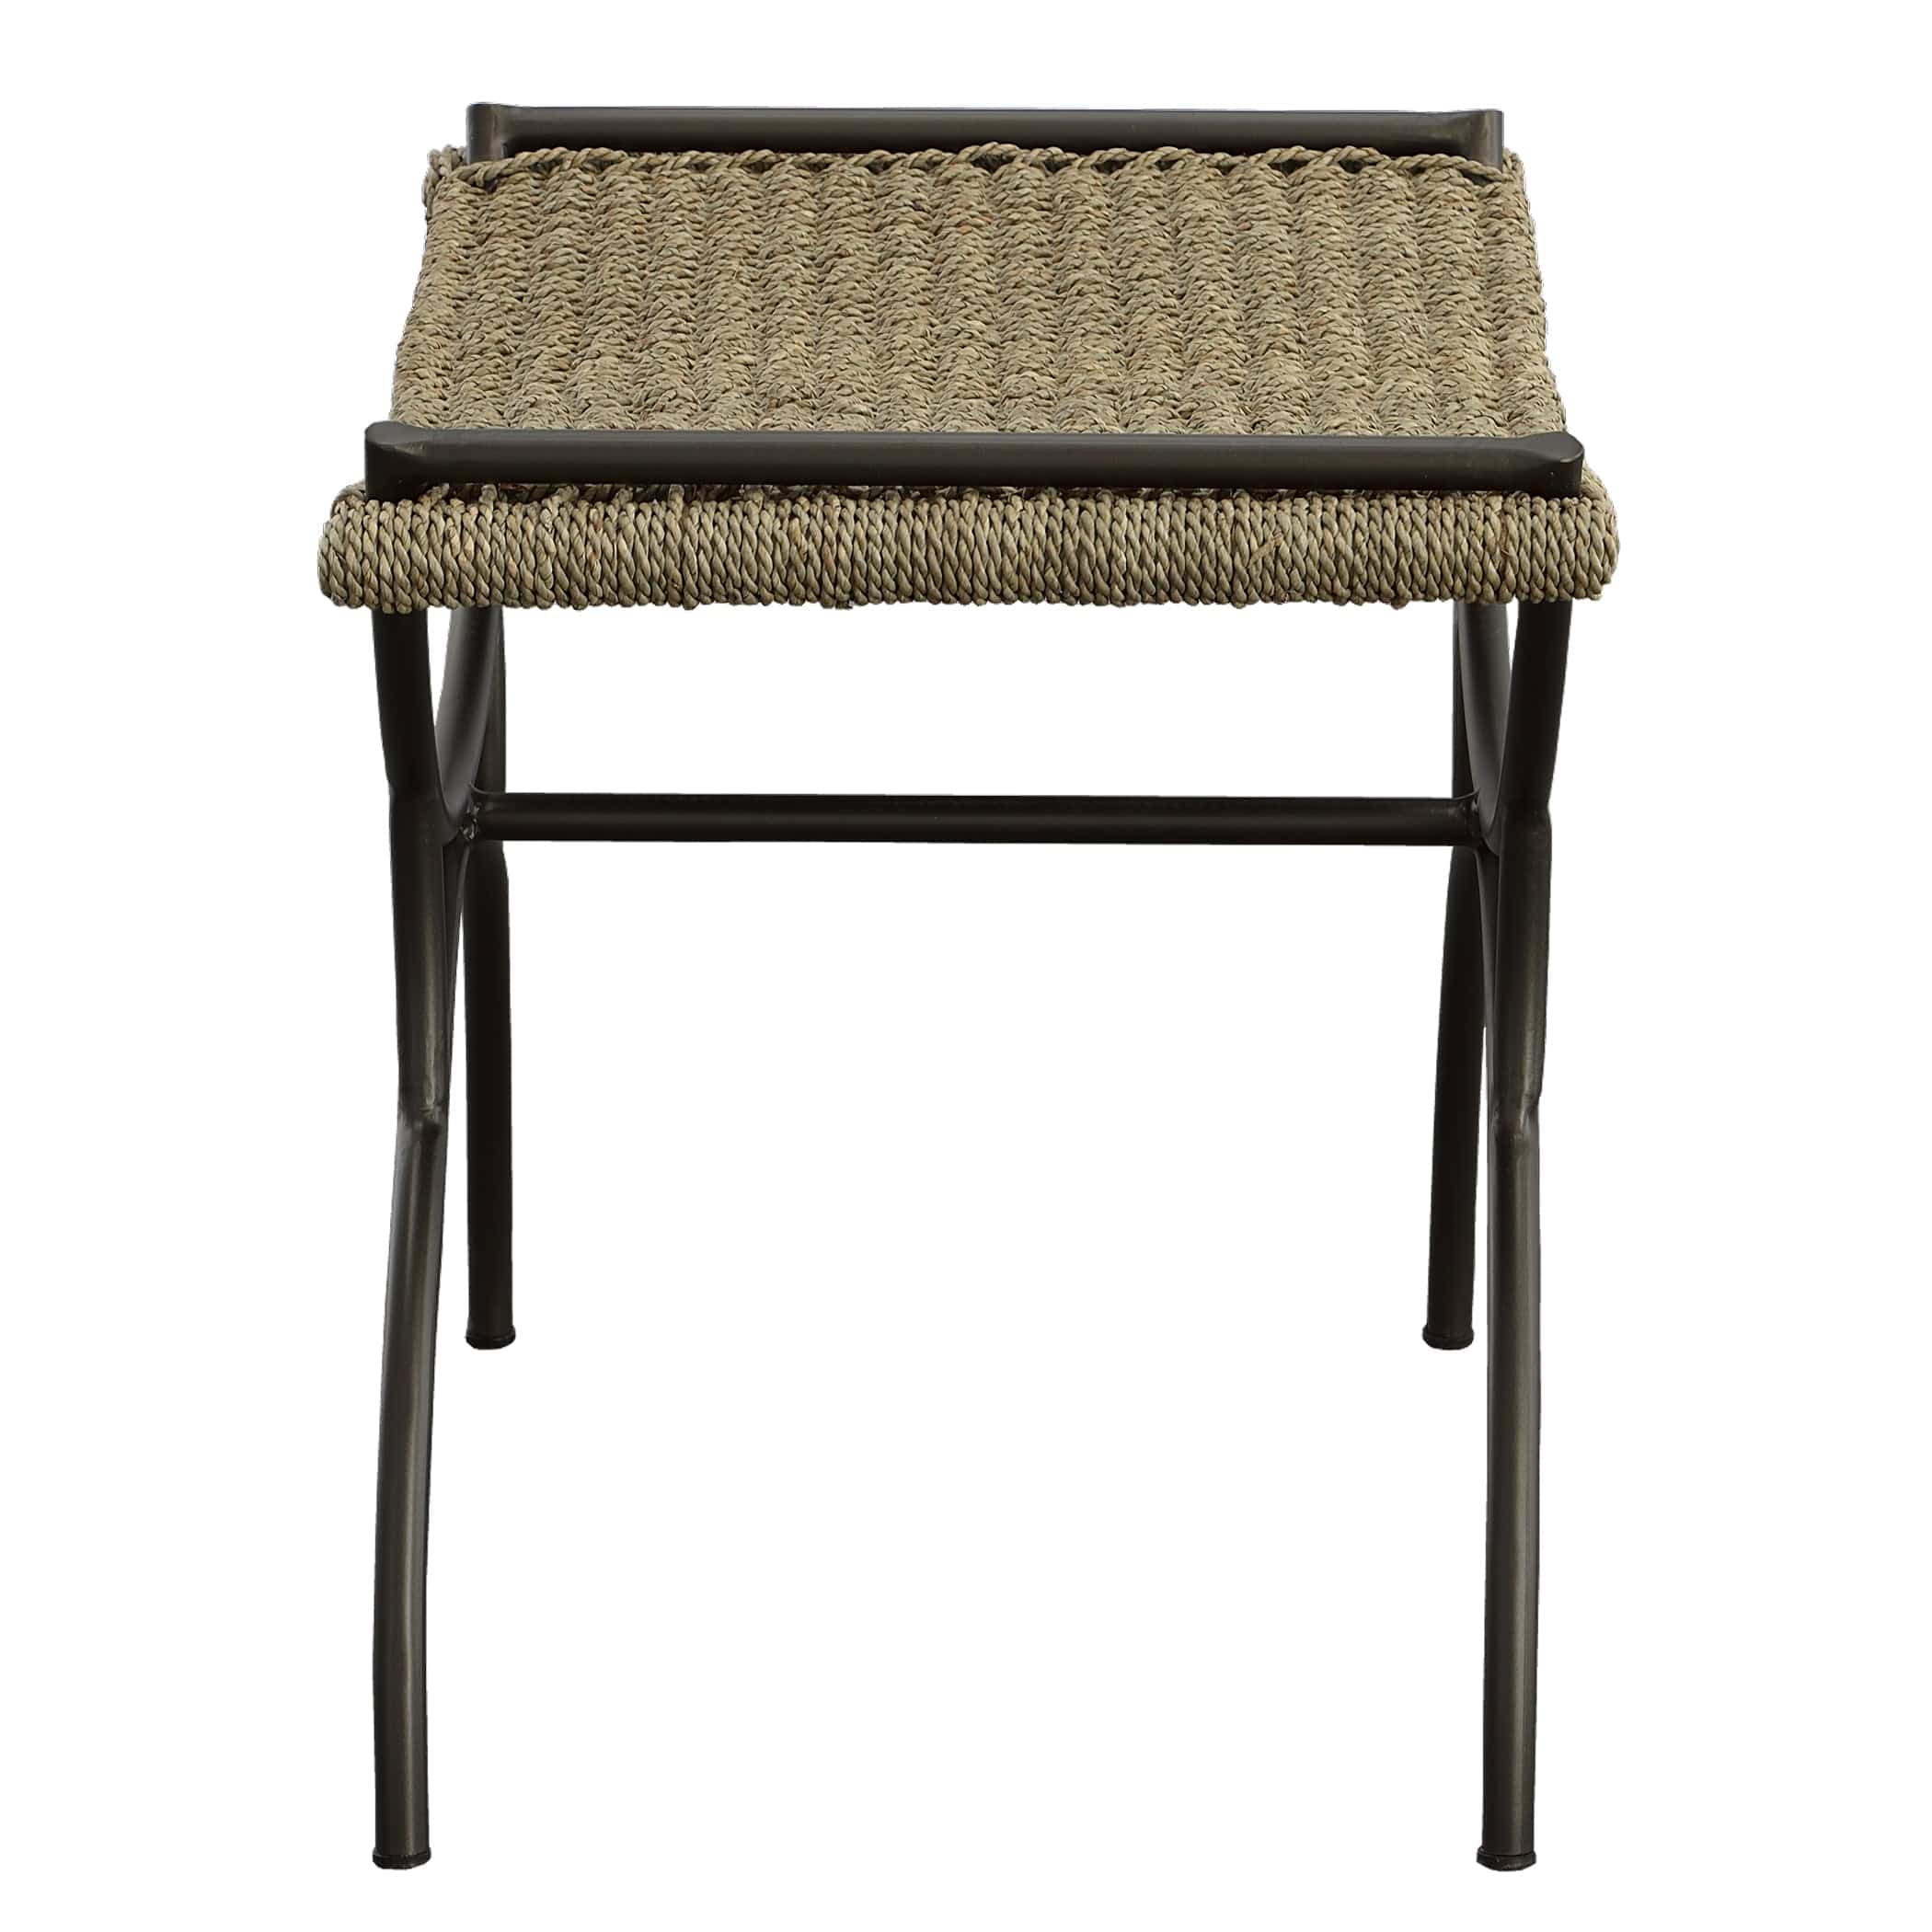 Playa Seagrass Small Bench Uttermost